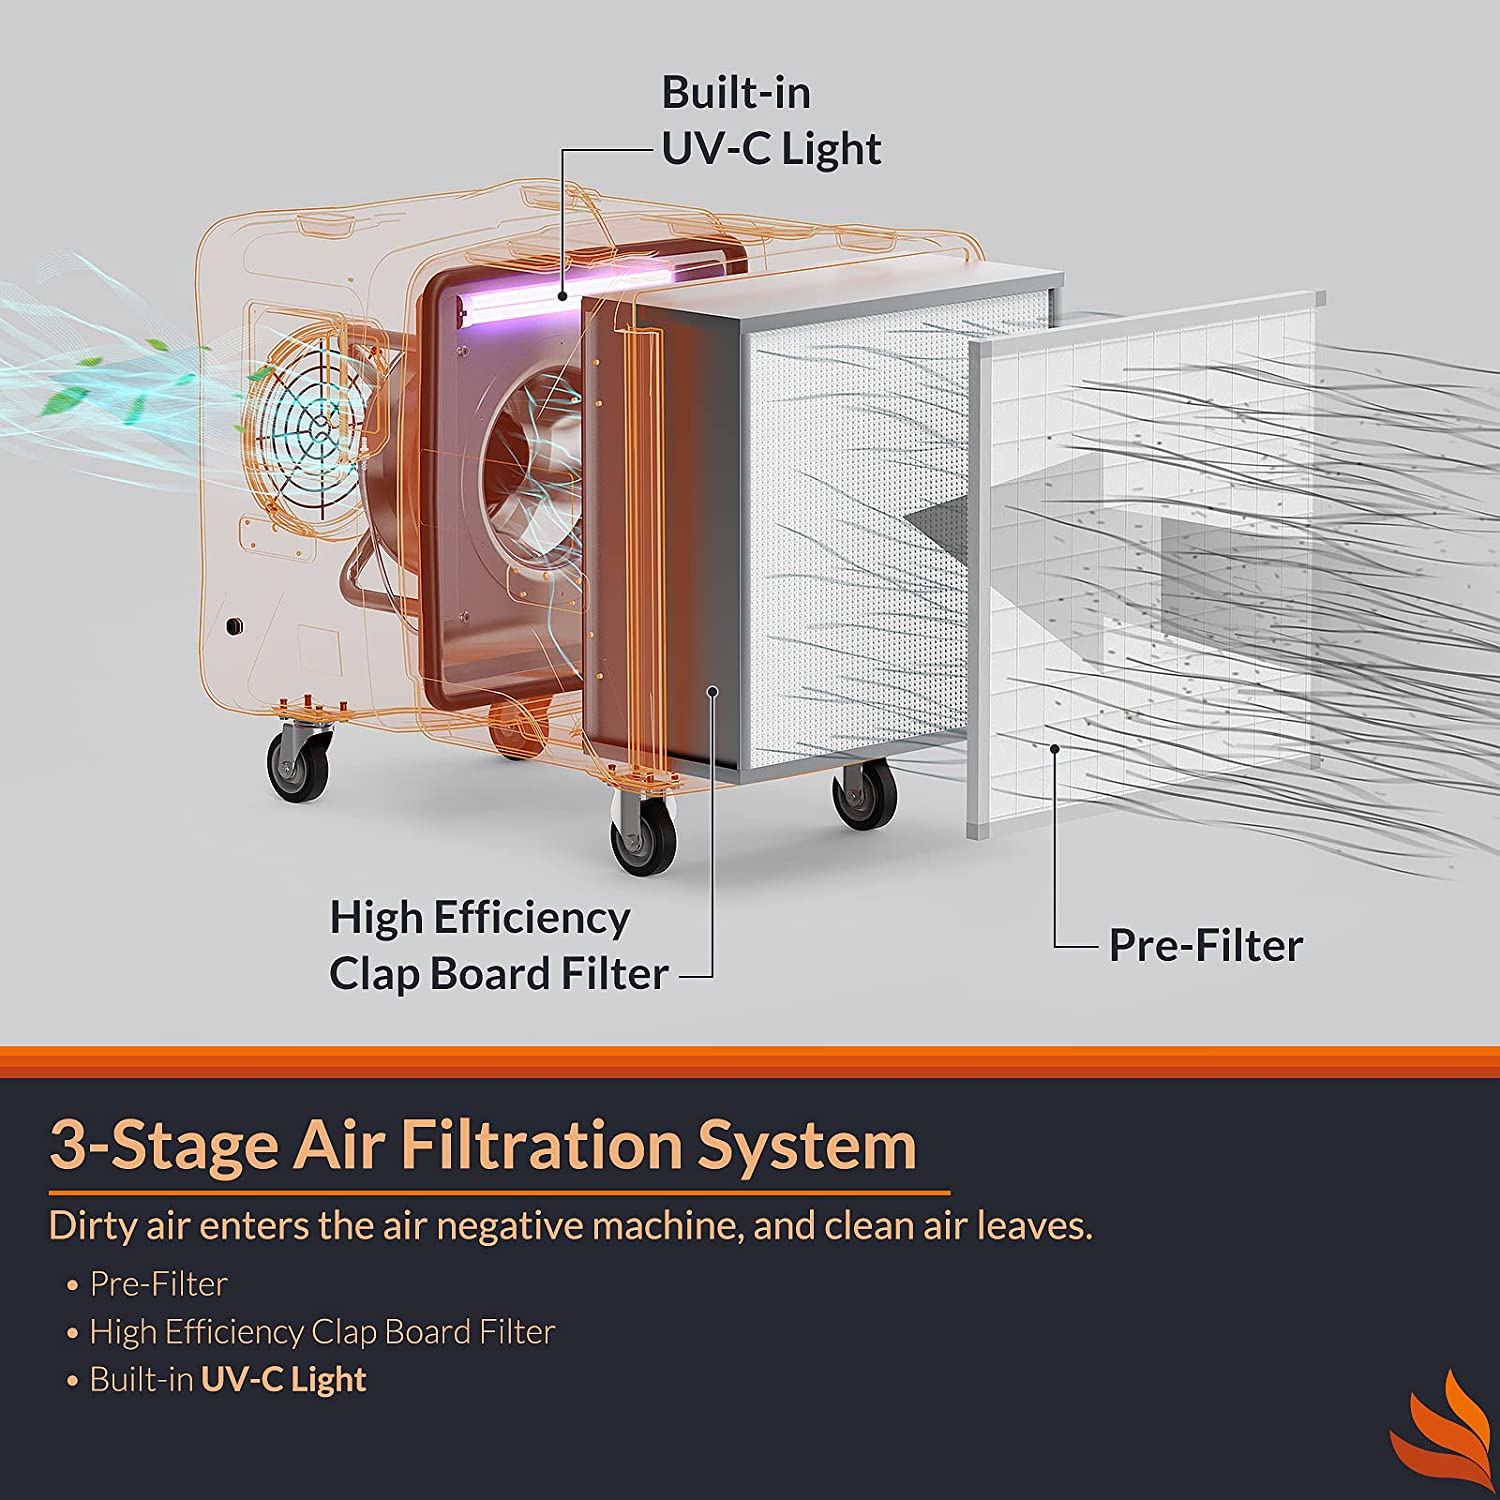 Purisystems PuriCare S2 UV Air Filtration System 2000 CFM, Commercial Air Scrubber with UV-C Light, 3 Stage Air Cleaner for Water/Fire Damage Restoration, Renovation, Construction Use